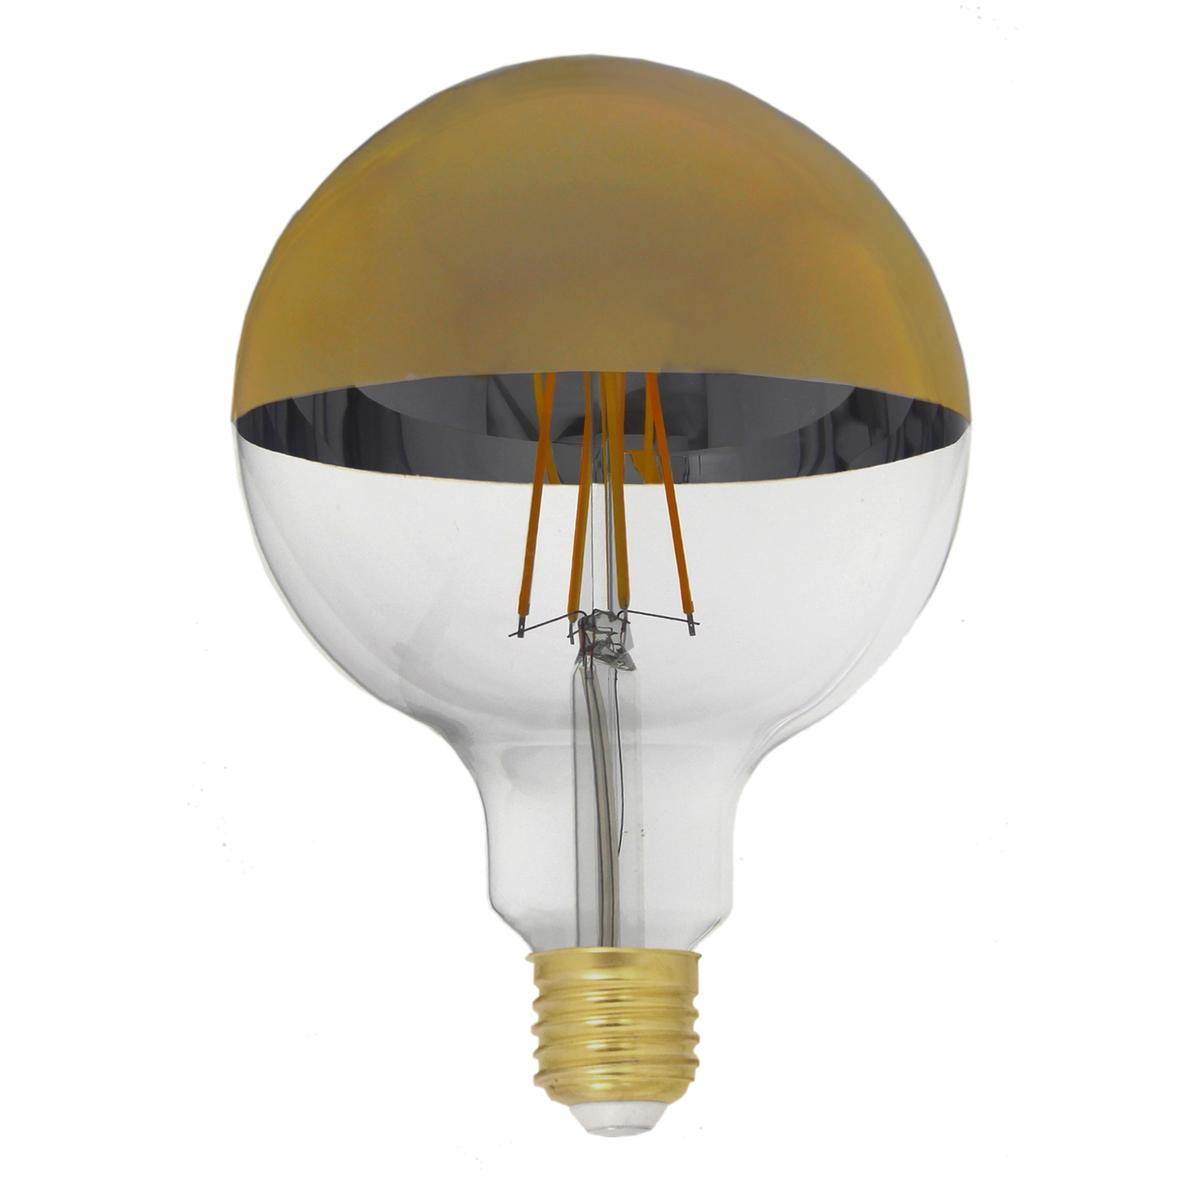 Ampoule LED E27 Filament Dimmable 8W G125 Globe Reflect Or